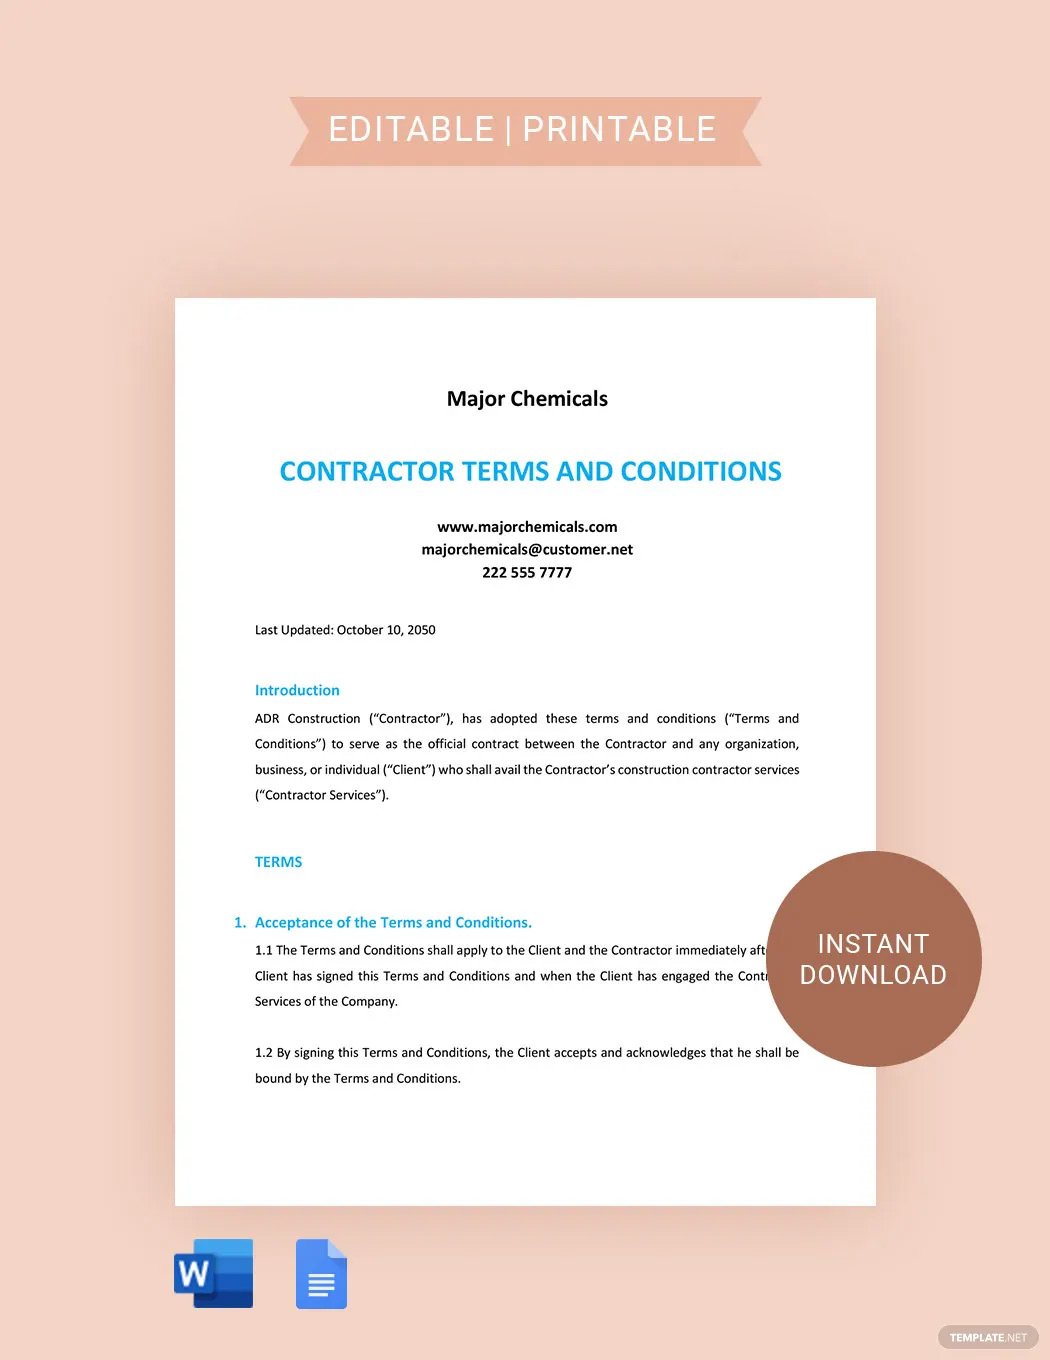 Contractor Terms and Conditions Template in Word, Google Docs